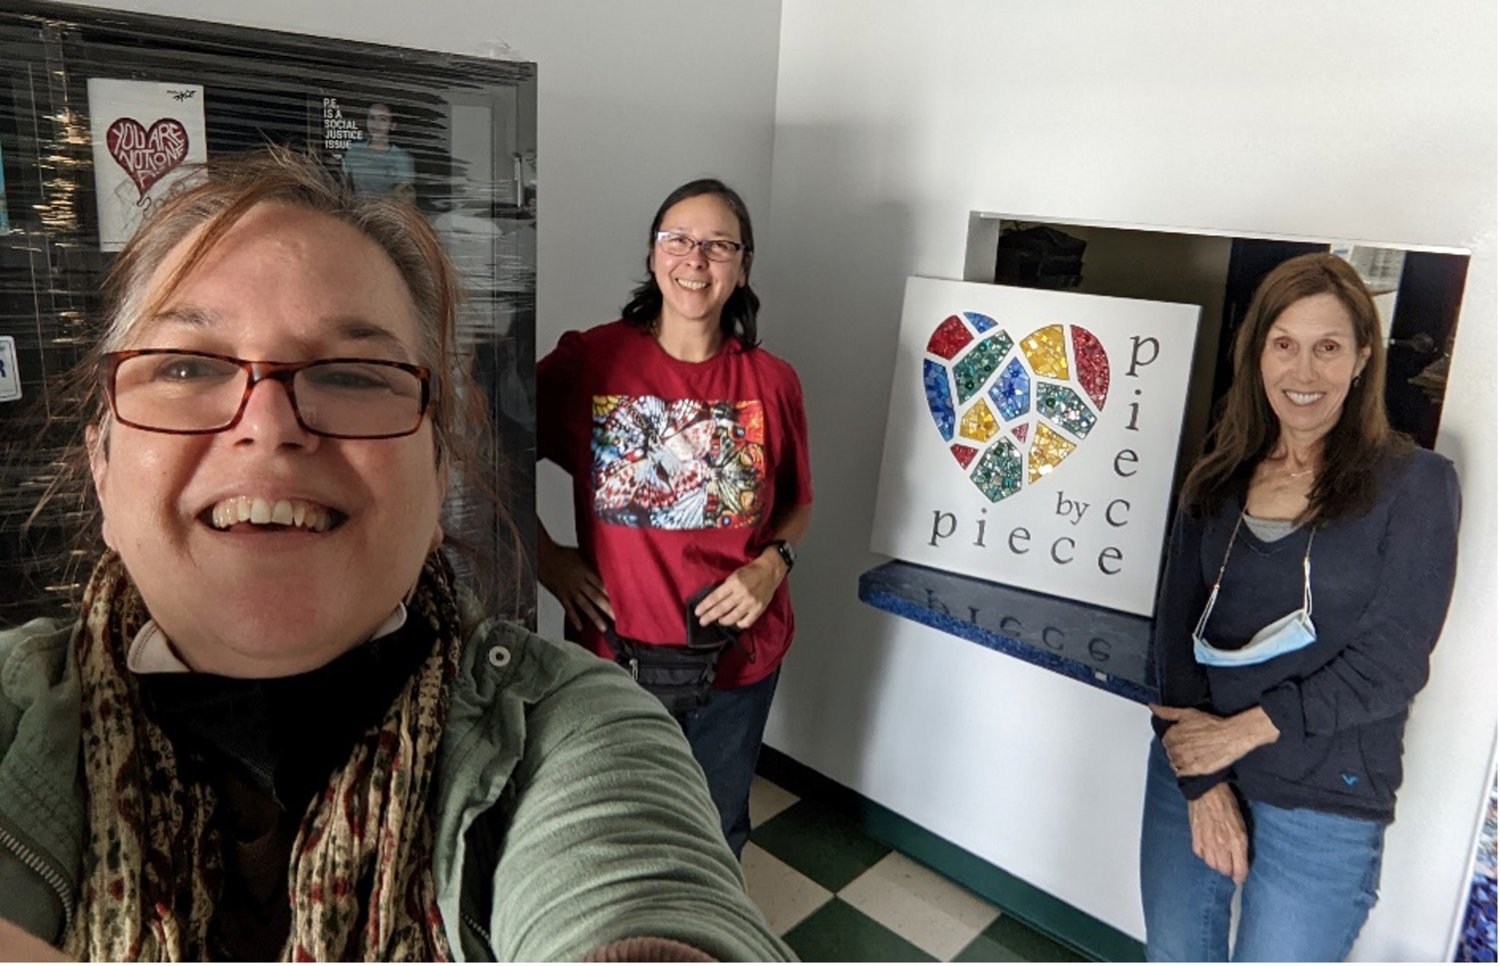 Three members of the Piece by Piece staff take a selfie with a mosaic of the Piece by Piece logo.